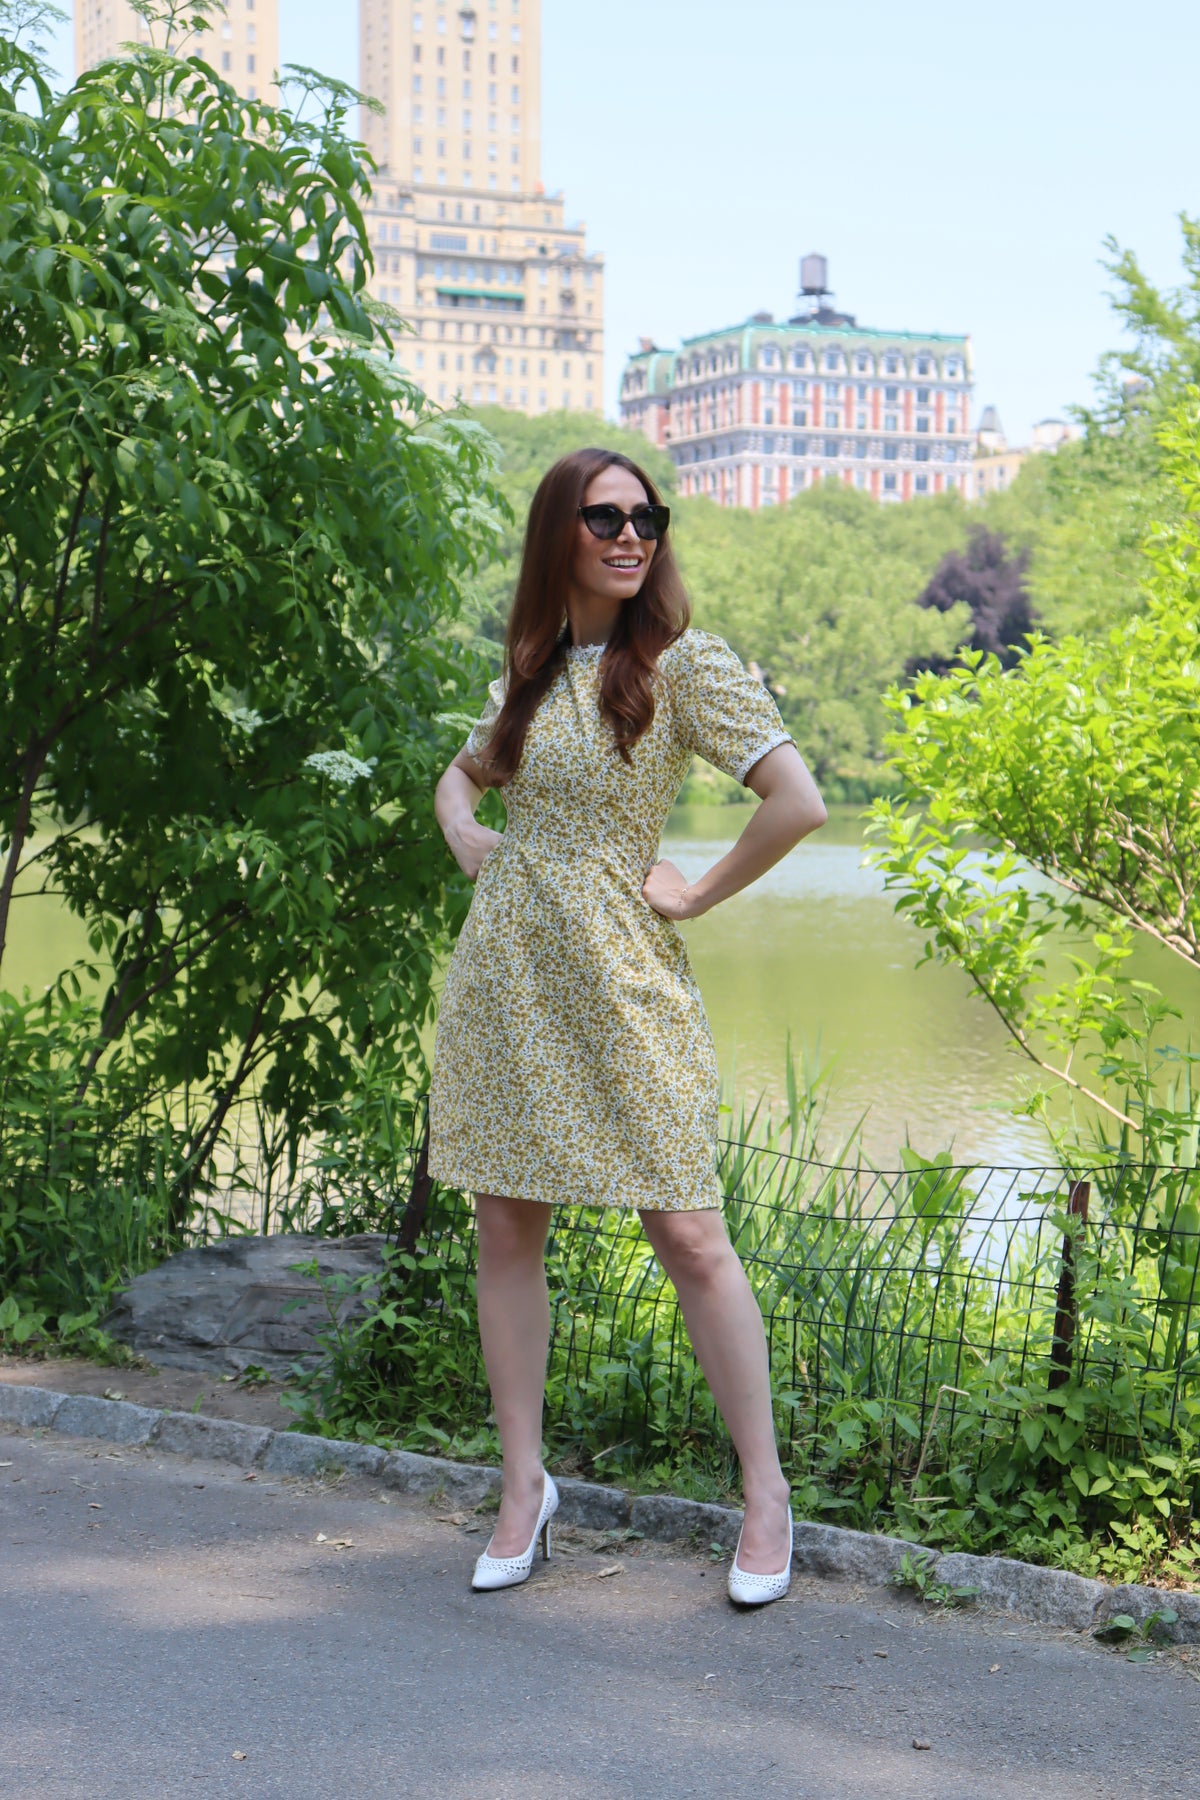 Photo of a model in short yellow floral dress with short sleeves and white daisy trim leaning standing in front of a lake with buildings in the background in Central Park.on a tree.